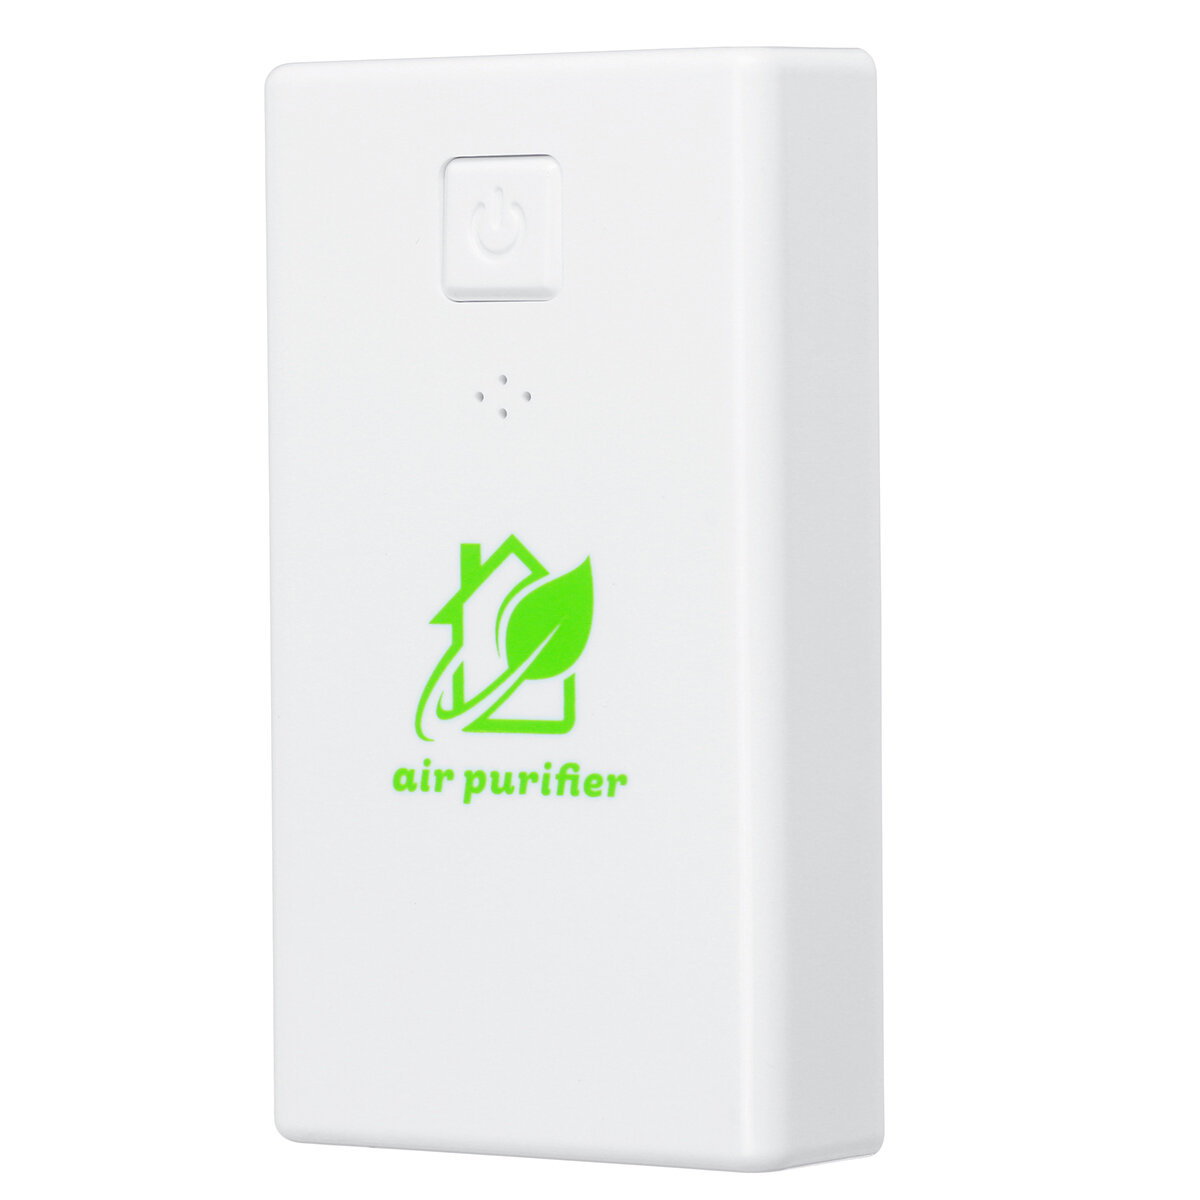 Portable Plug-in Air Purifier Negative Ion Air Purification Remove Formaldehyde Dust Eliminate Odor Low Noise Energy Sav